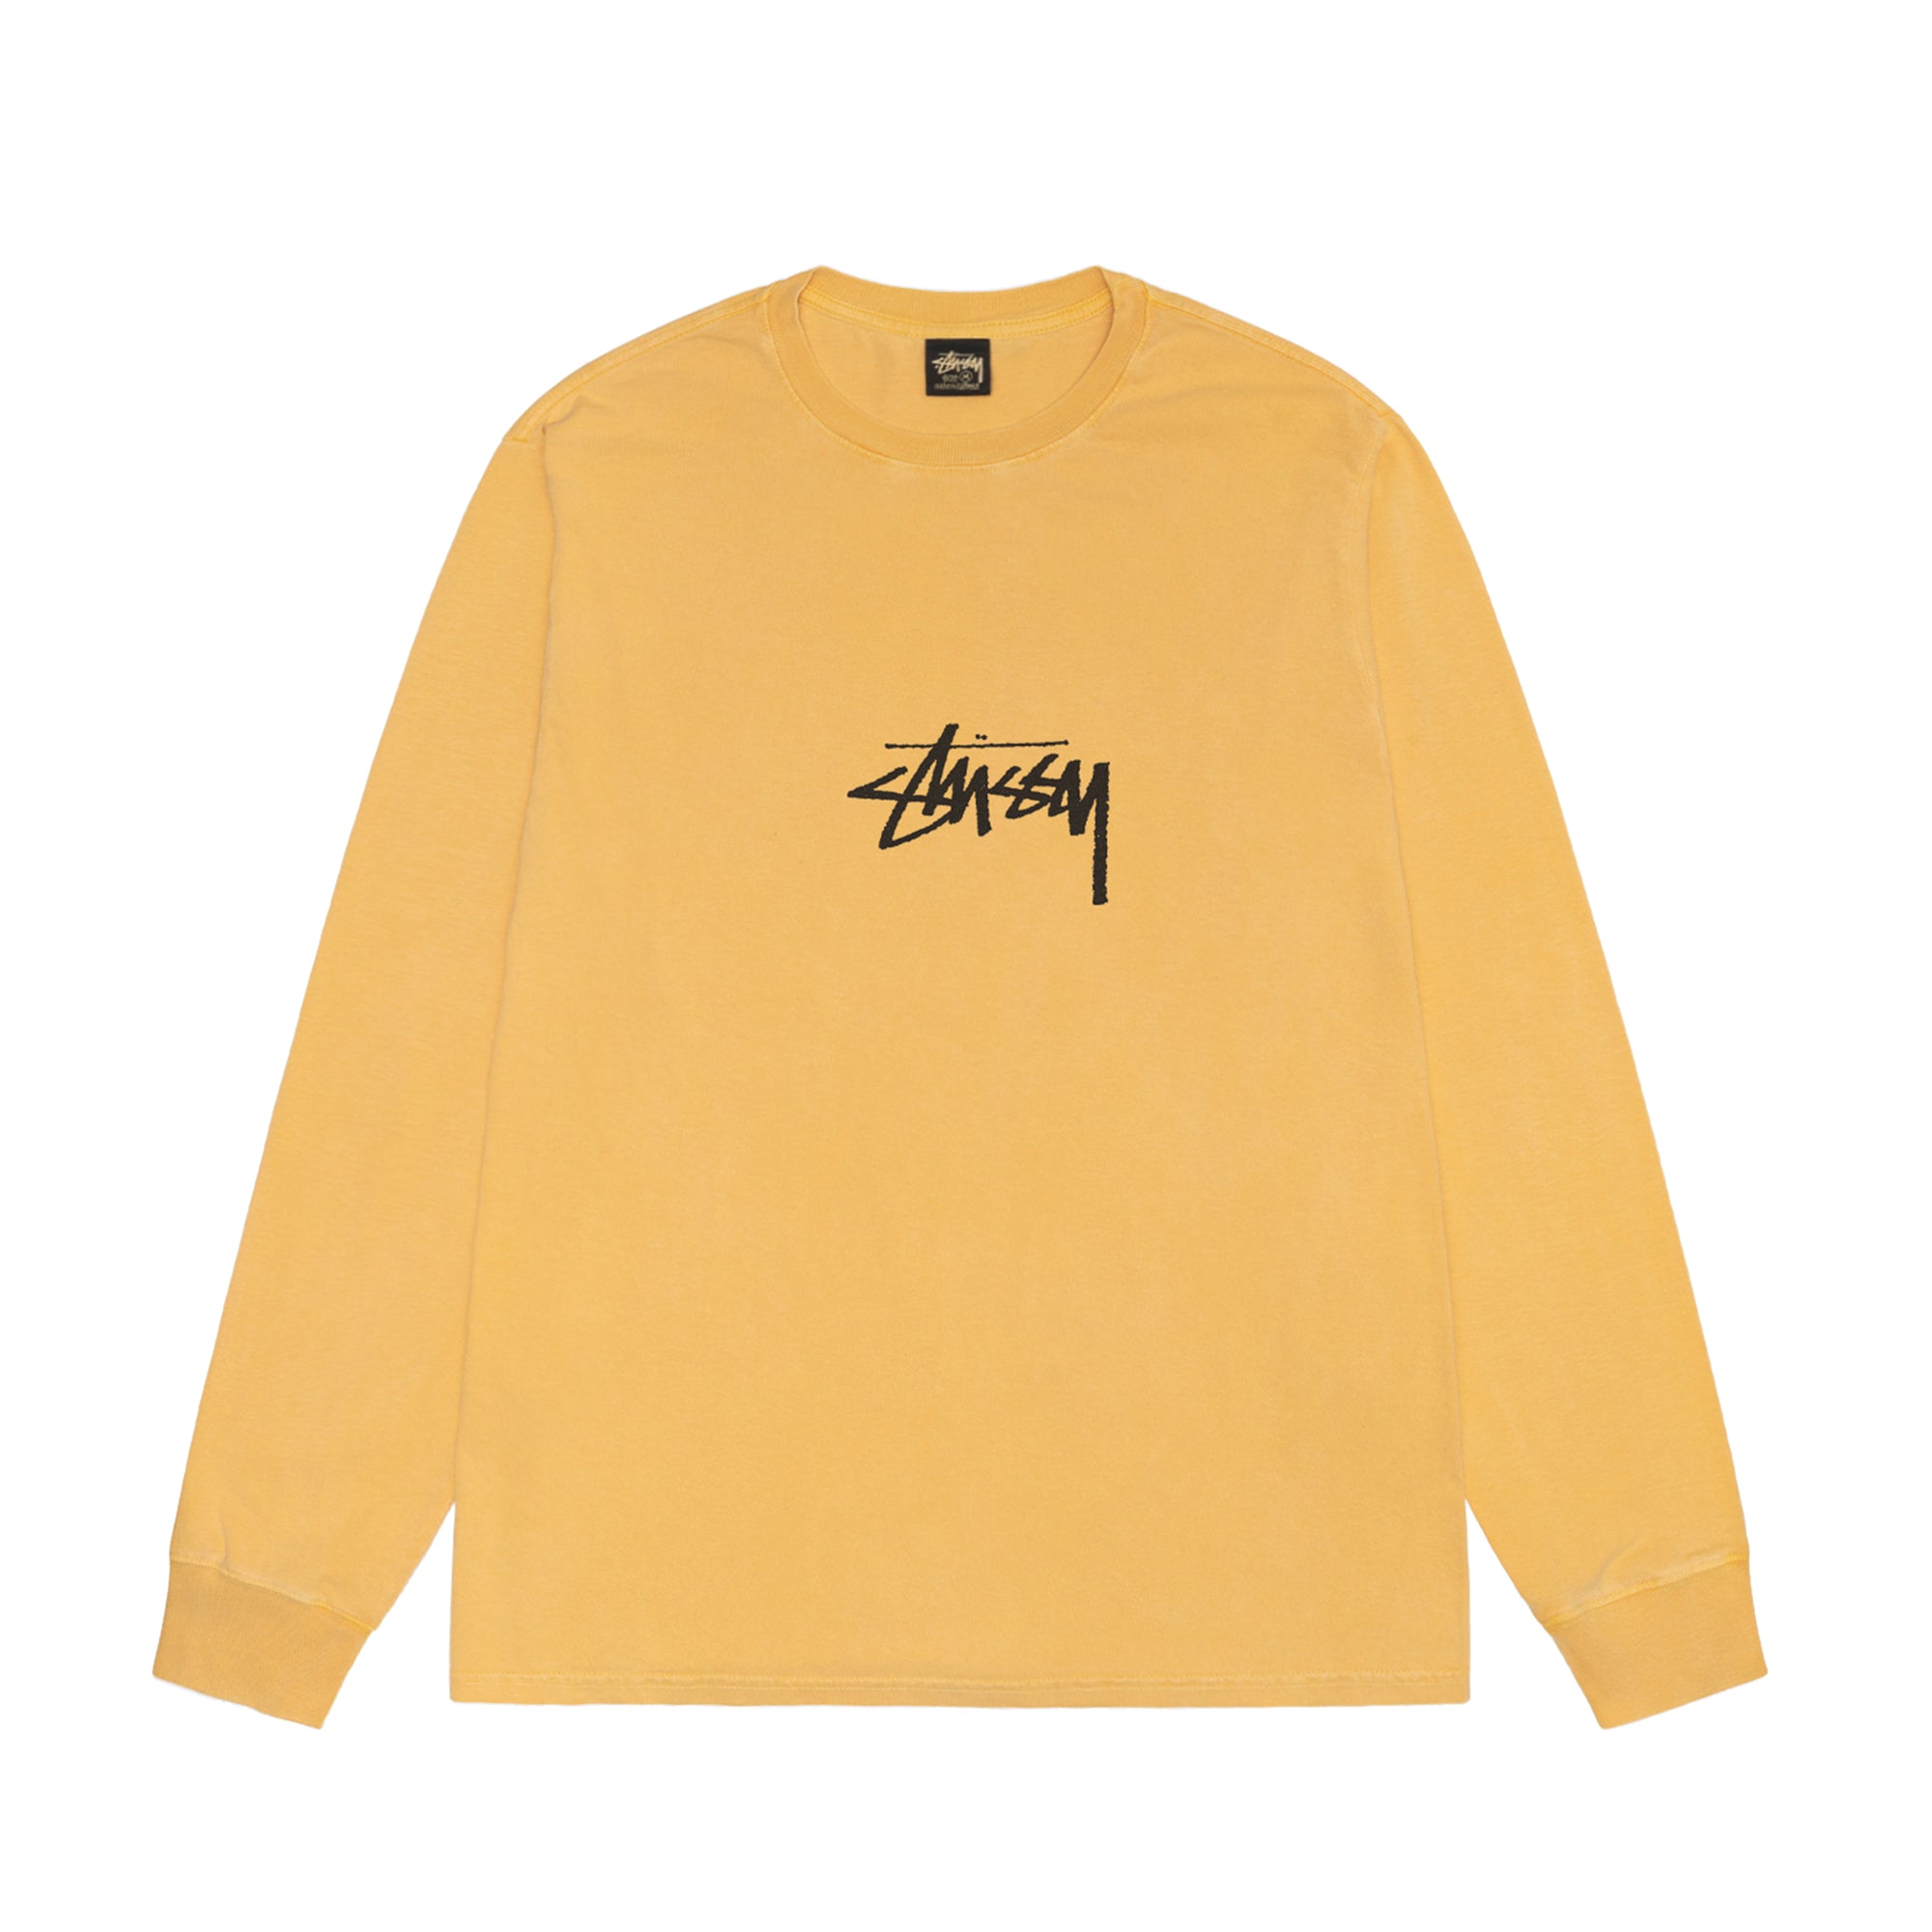 Stüssy - Men's Small Stock Pig. Dyed Ls Tee - (Honey) view 1